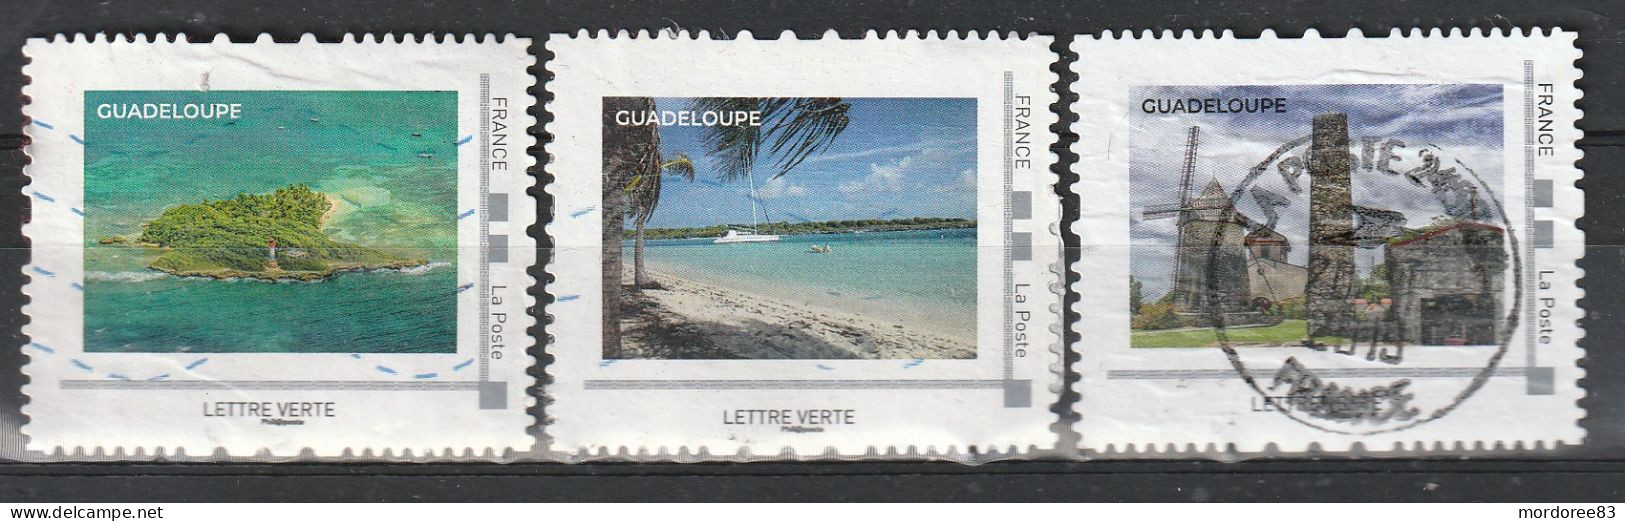 FRANCE 2019 ISSU COLLECTOR GUADELOUPE OBLITERE - Collectors